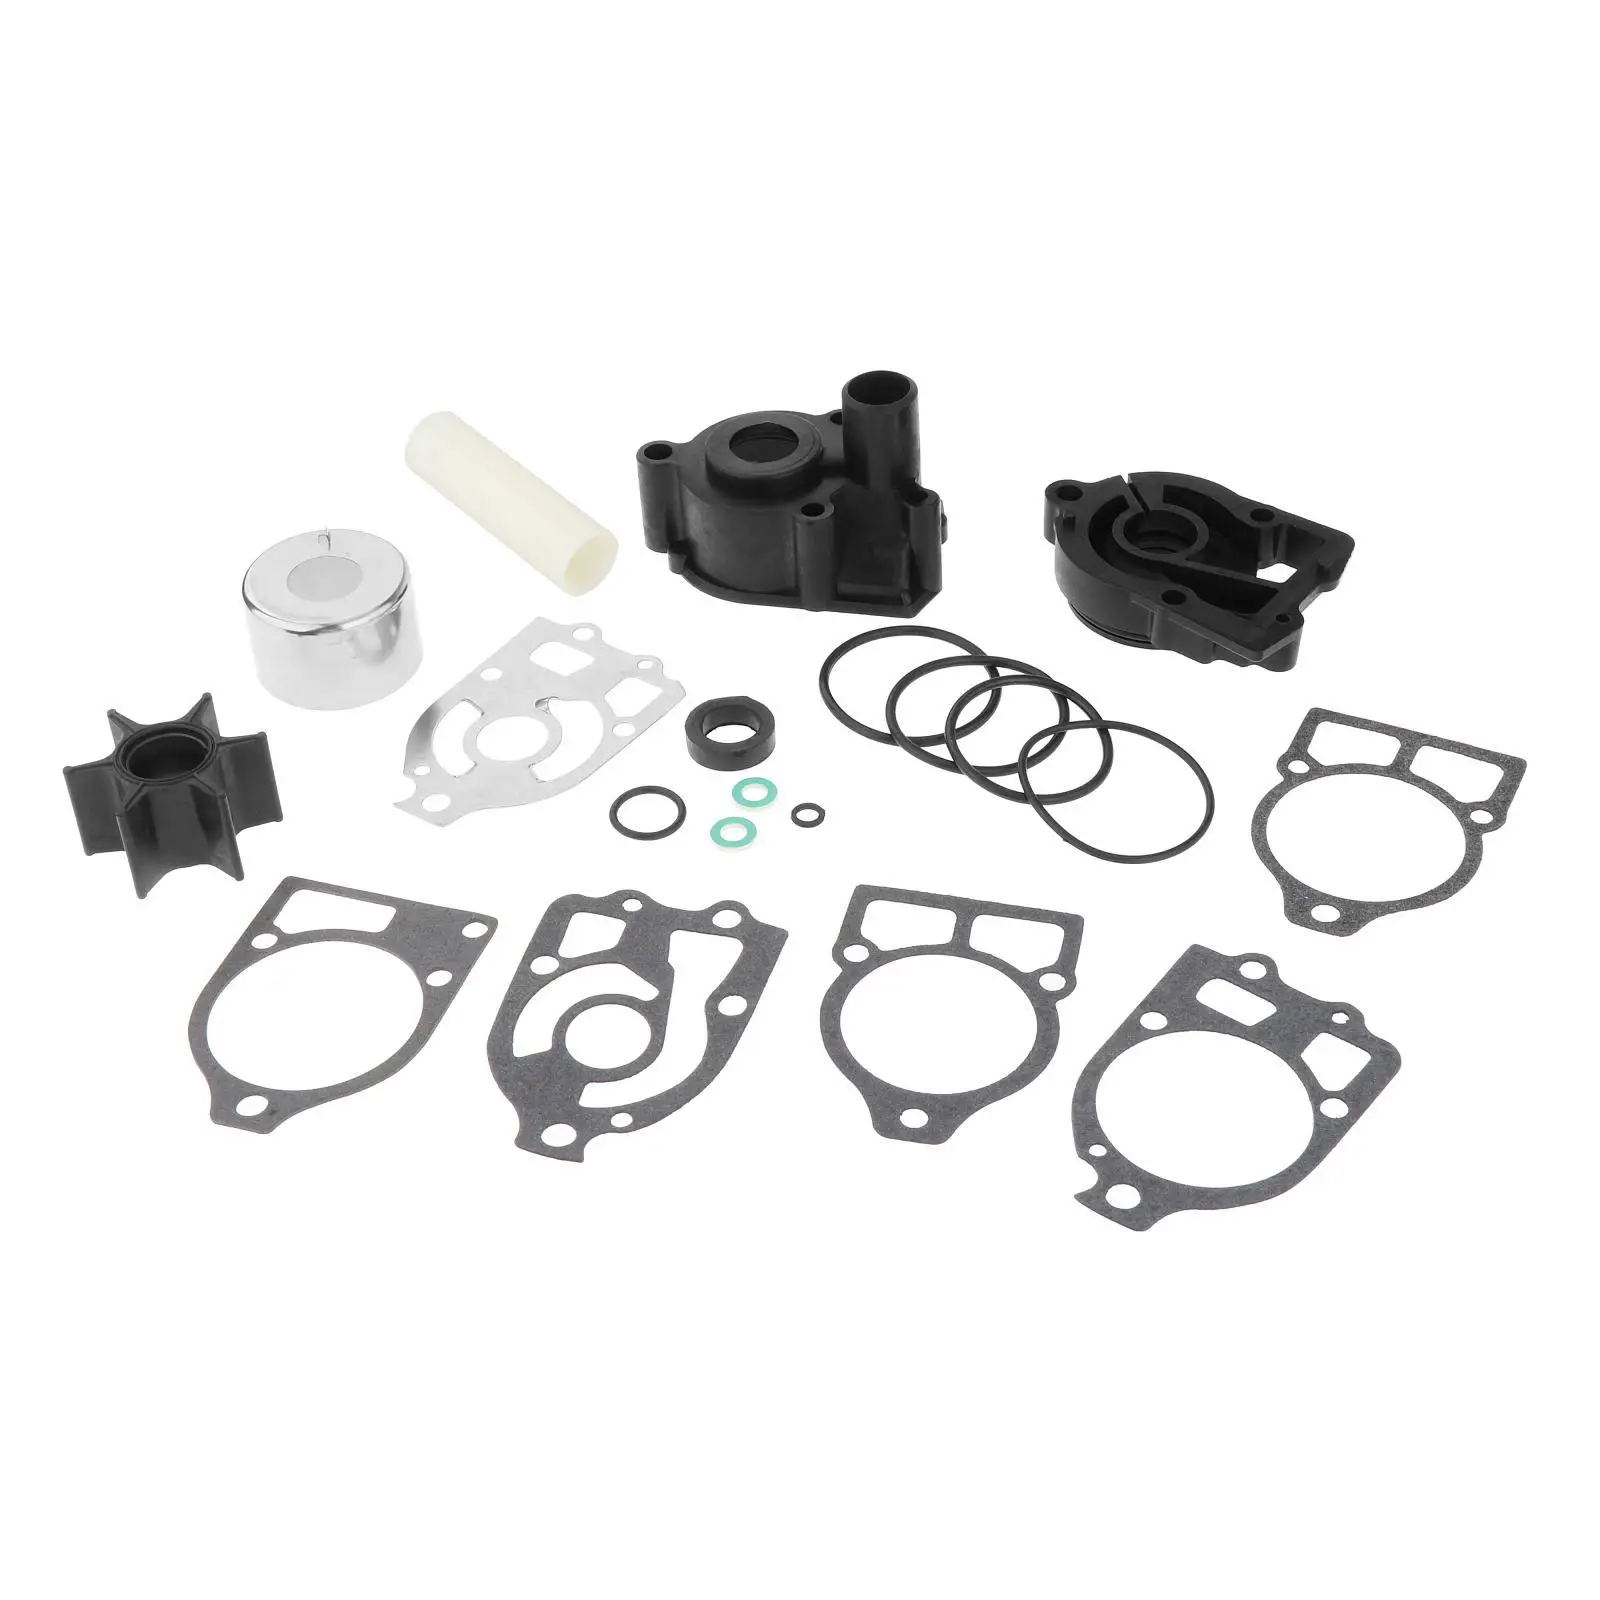 Water Pump Repair Kit with Housing Fit for Mercury 46-48747A3 Replacement